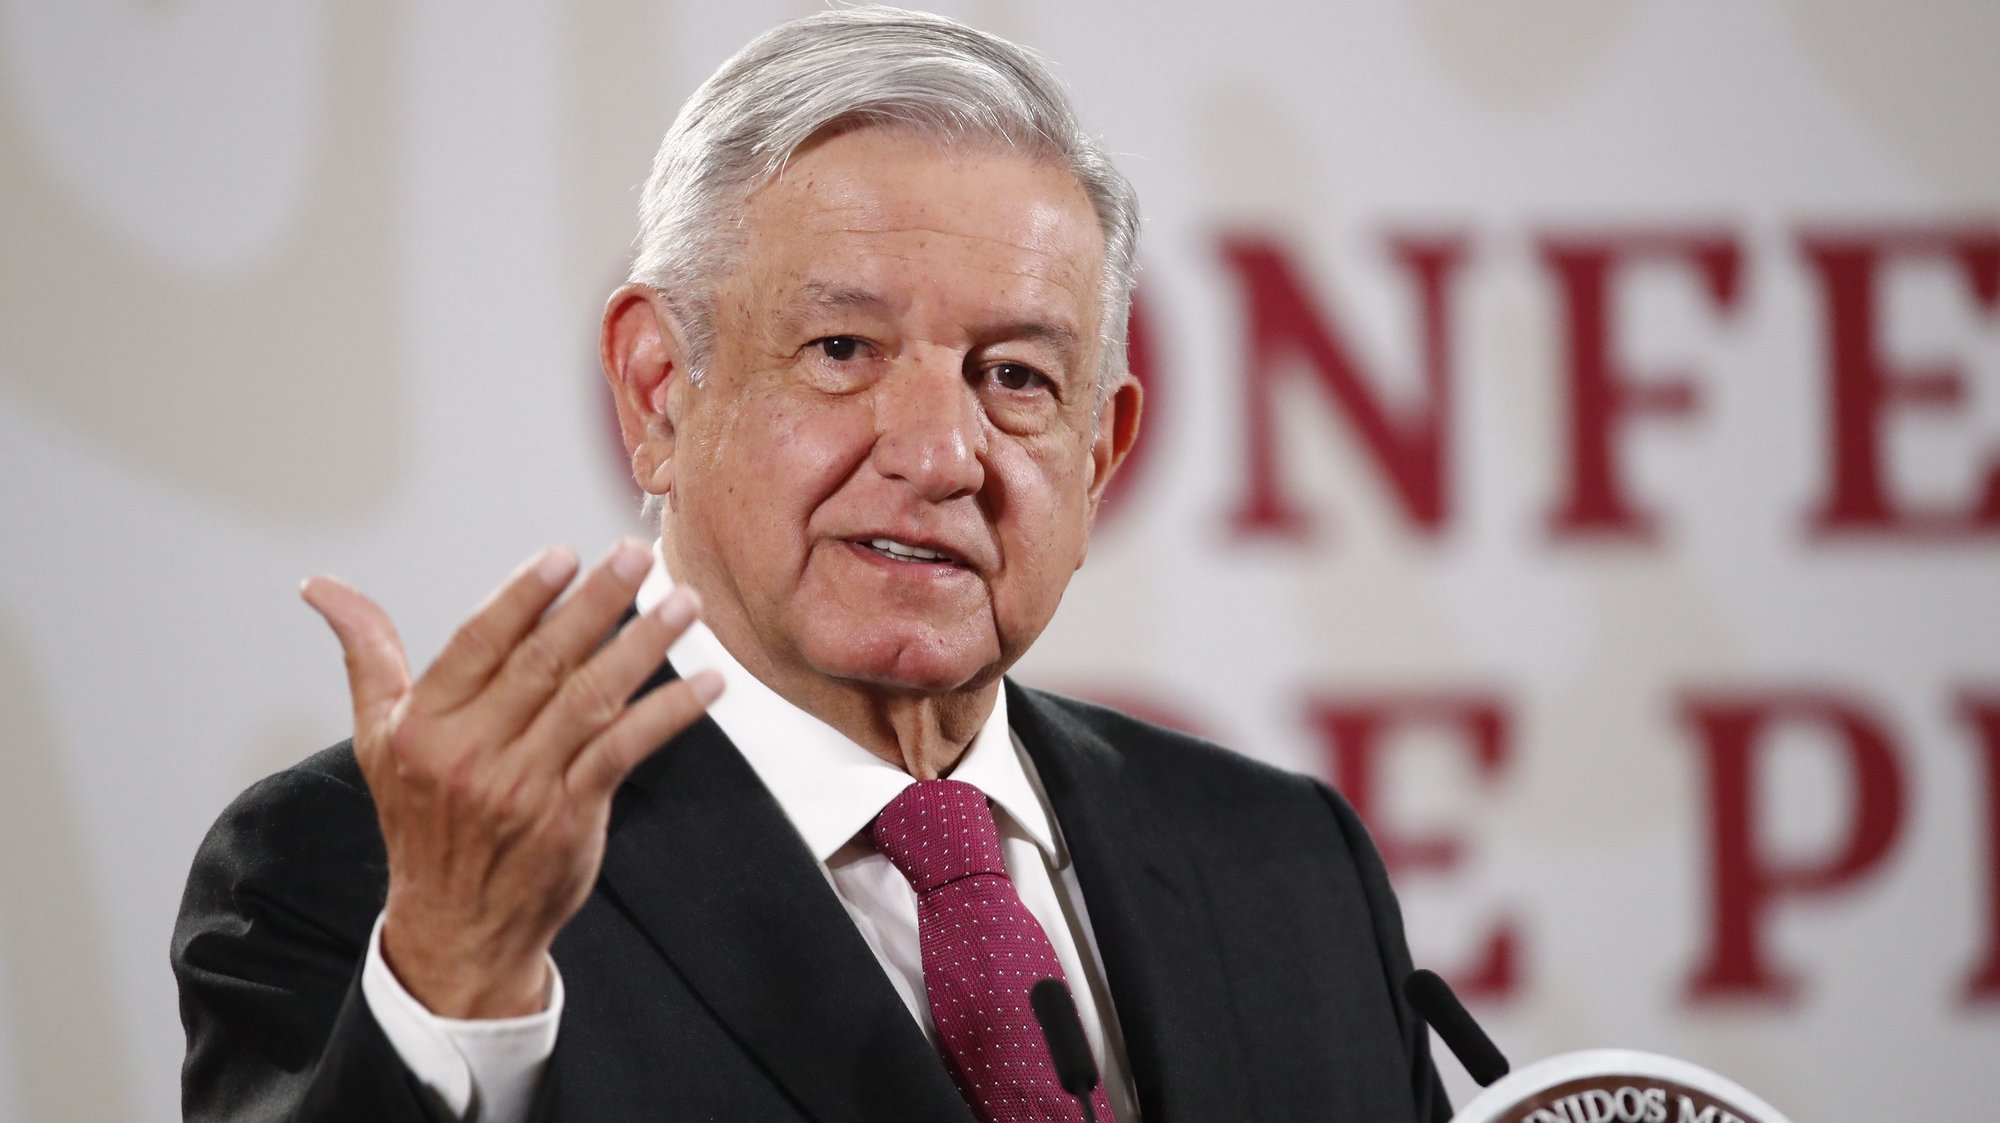 epa08963389 (FILE) - The President of Mexico, Andres Manuel Lopez Obrador, speaks during a morning press conferenceat the National Palace in Mexico City, Mexico, 01 July 2020 (reissued 25 January 2021). Lopez Obrador announced on 24 January that he has tested positive for Covid-19.  EPA/Jose Mendez